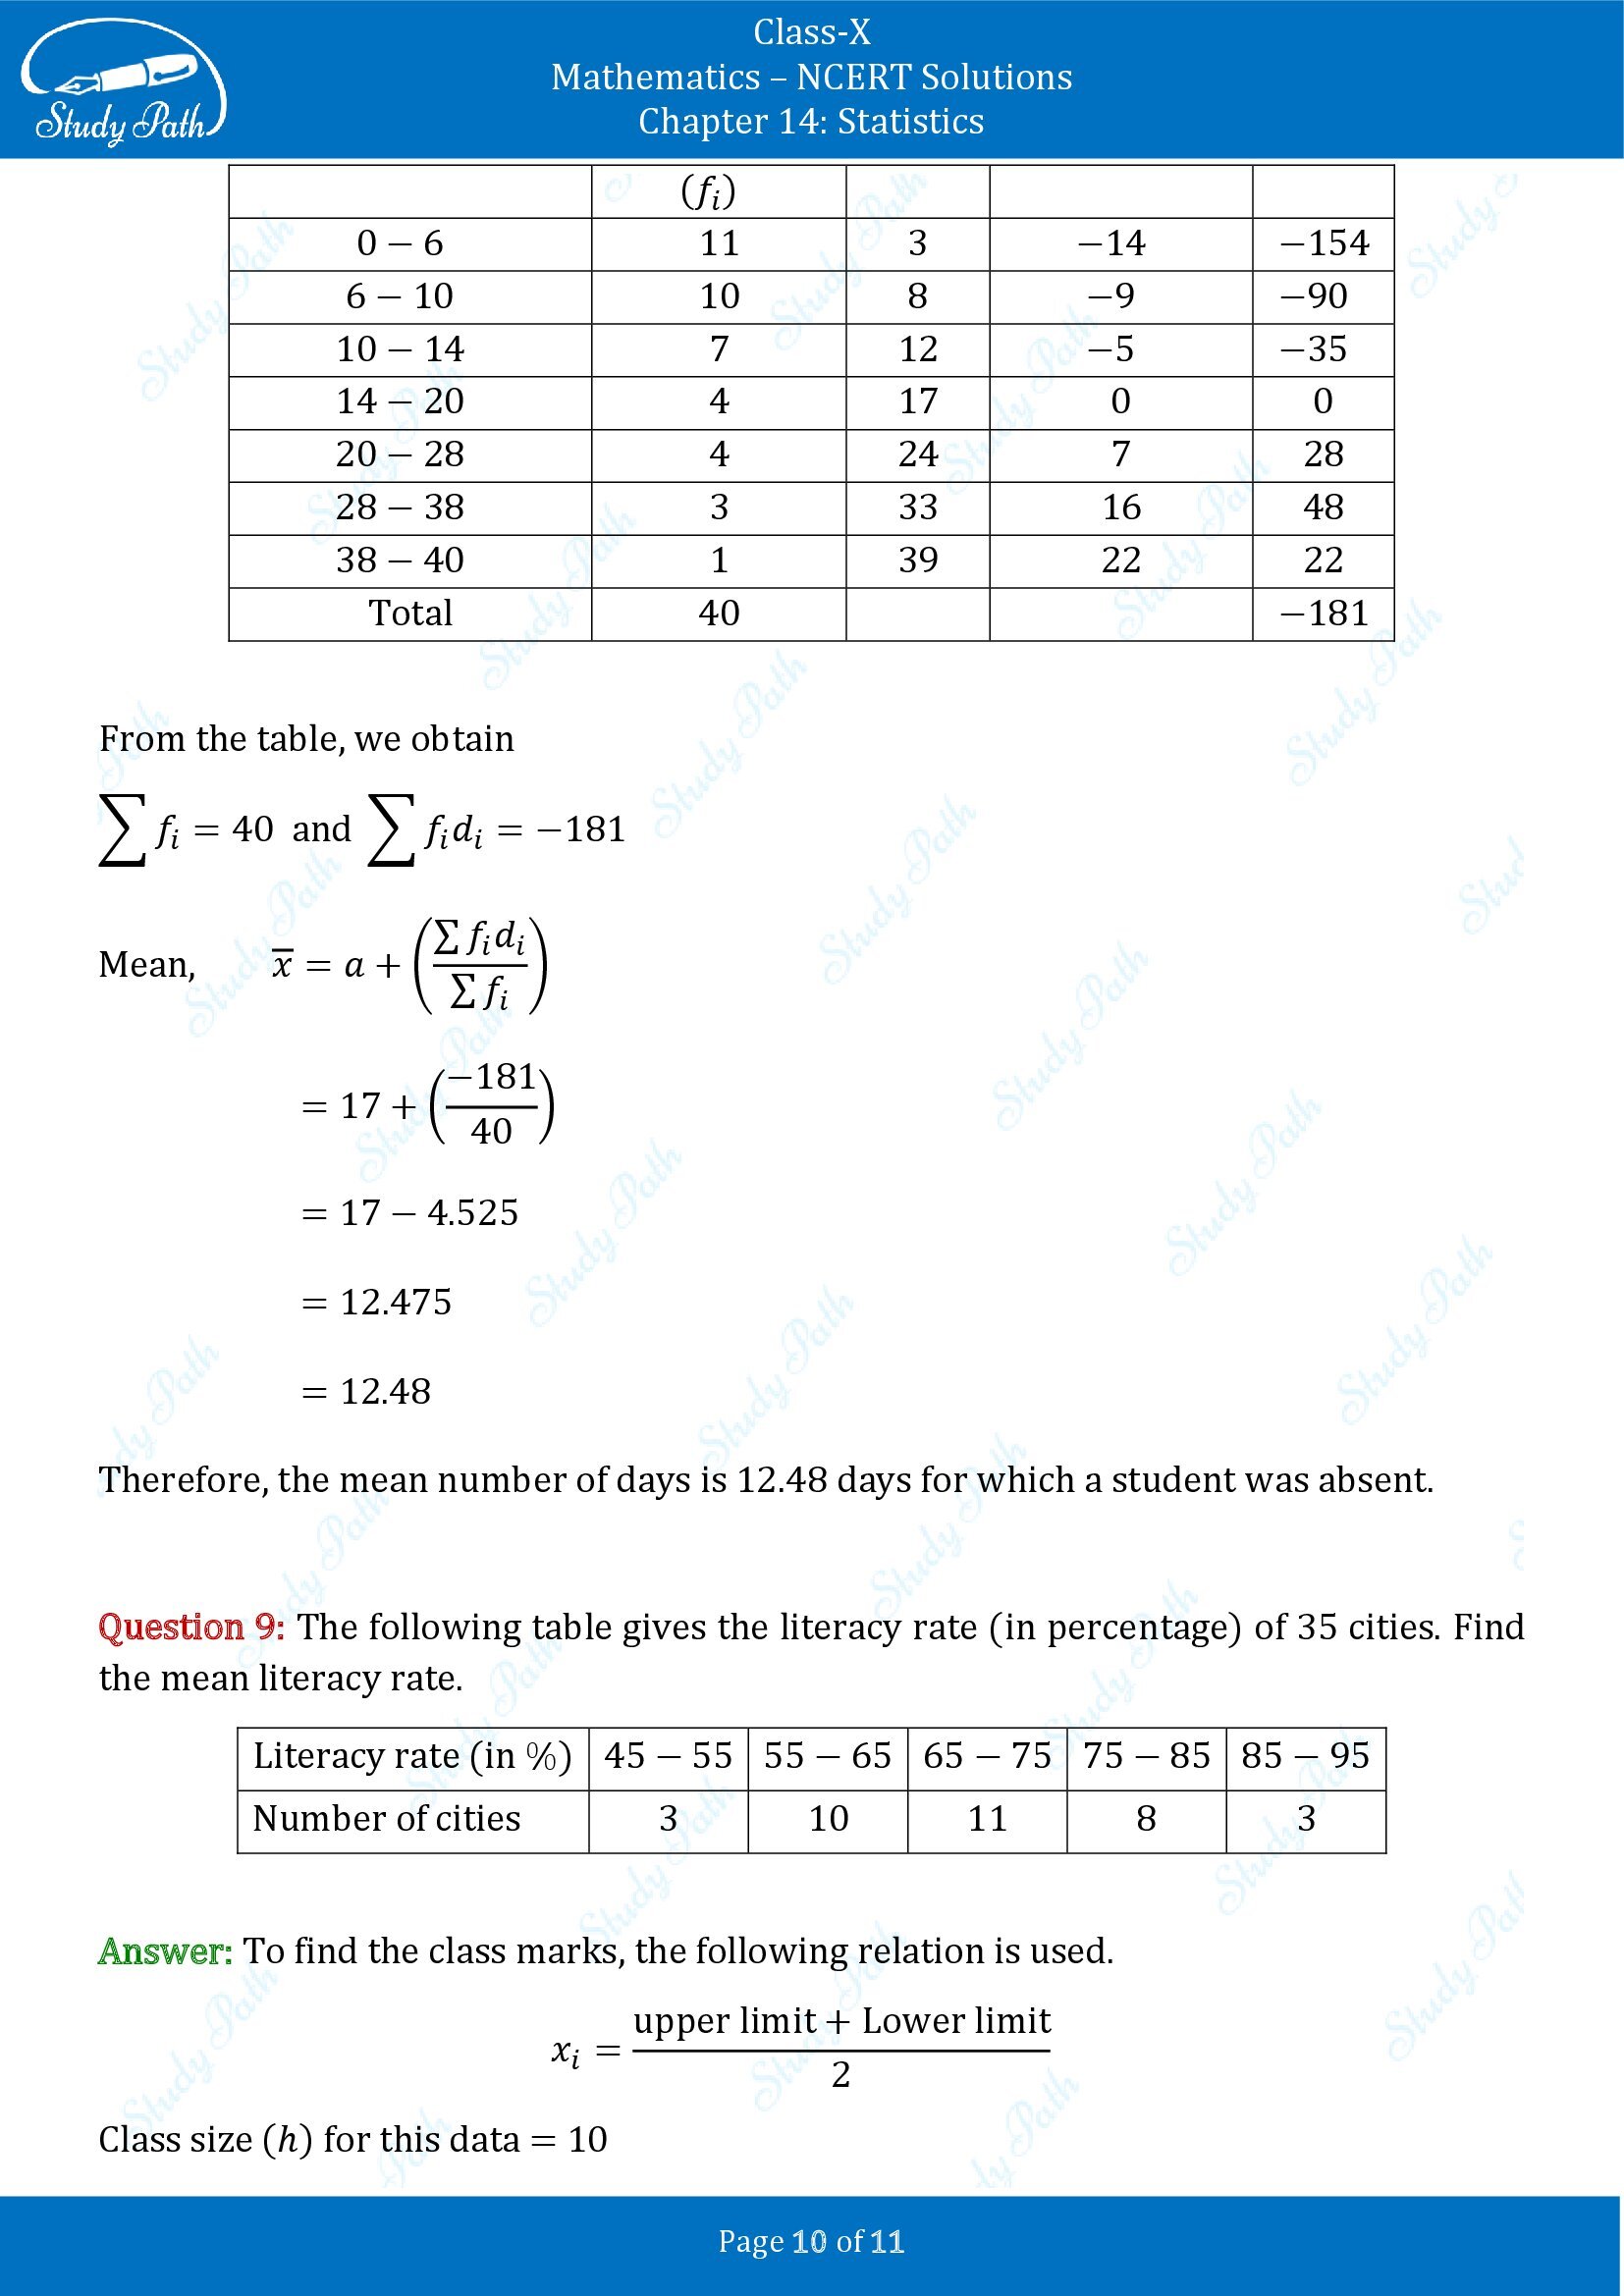 NCERT Solutions for Class 10 Maths Chapter 14 Statistics Exercise 14.1 00010